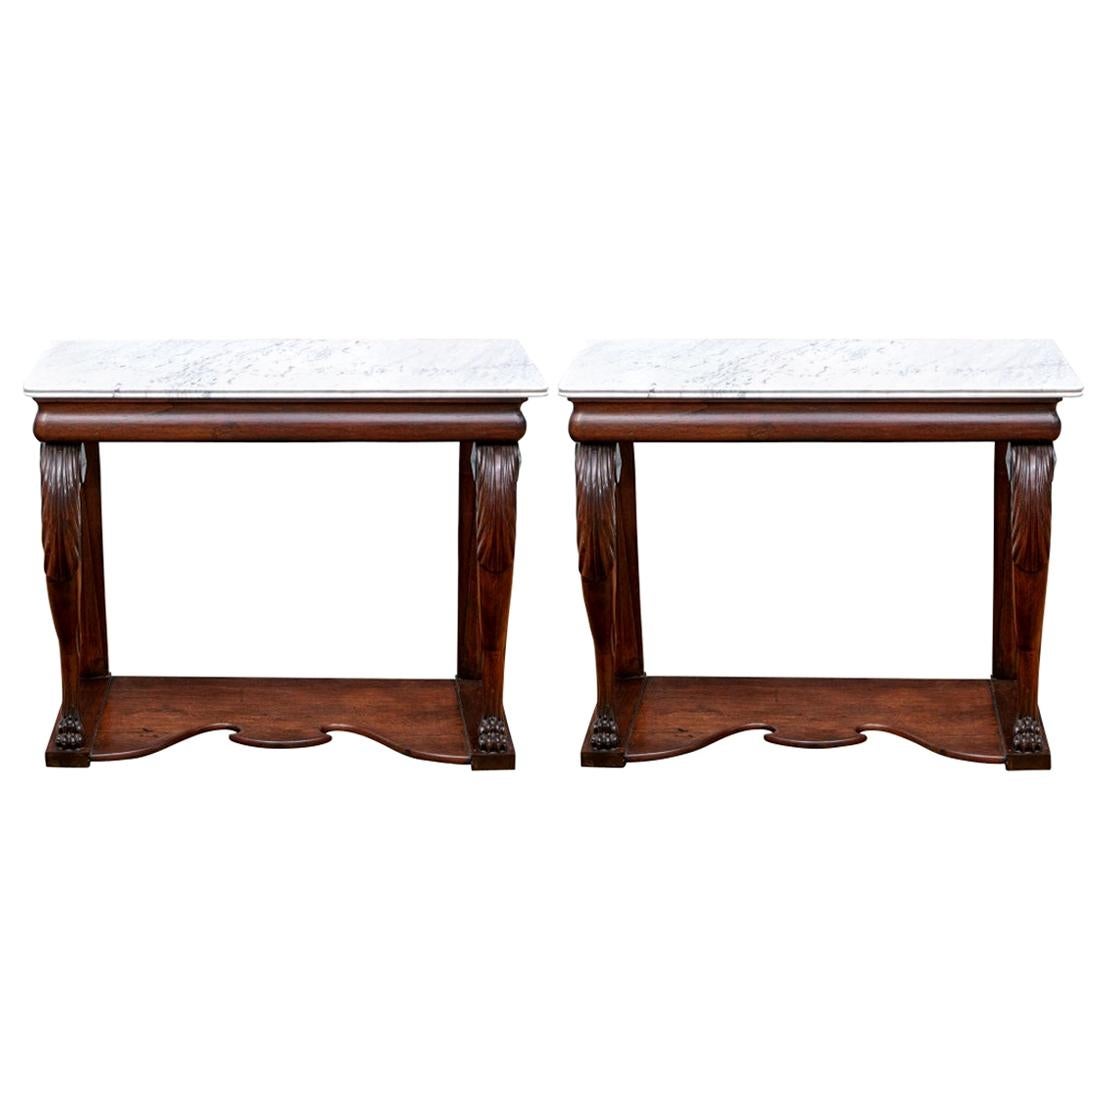 Fine Antique Transitional Empire Carved Mahogany Marble-Top Console Table, Pair